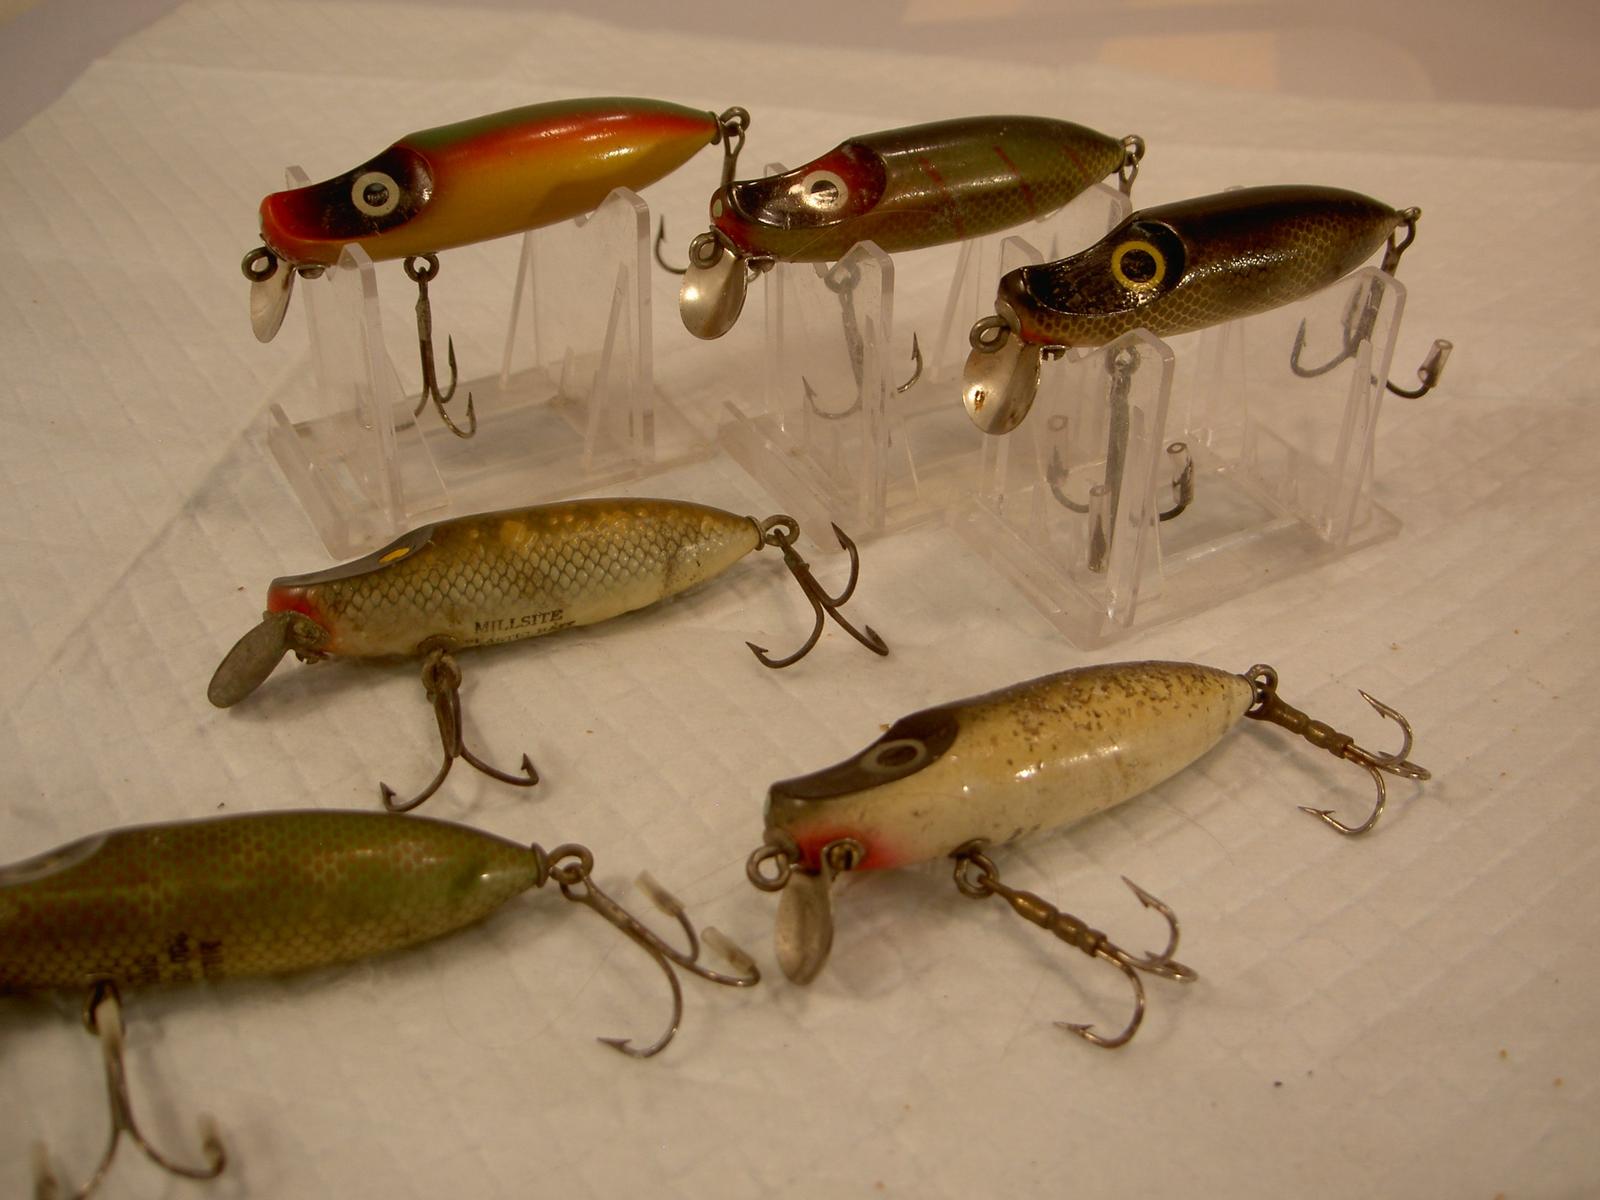 Millsite Bait lot old fishing lure collection